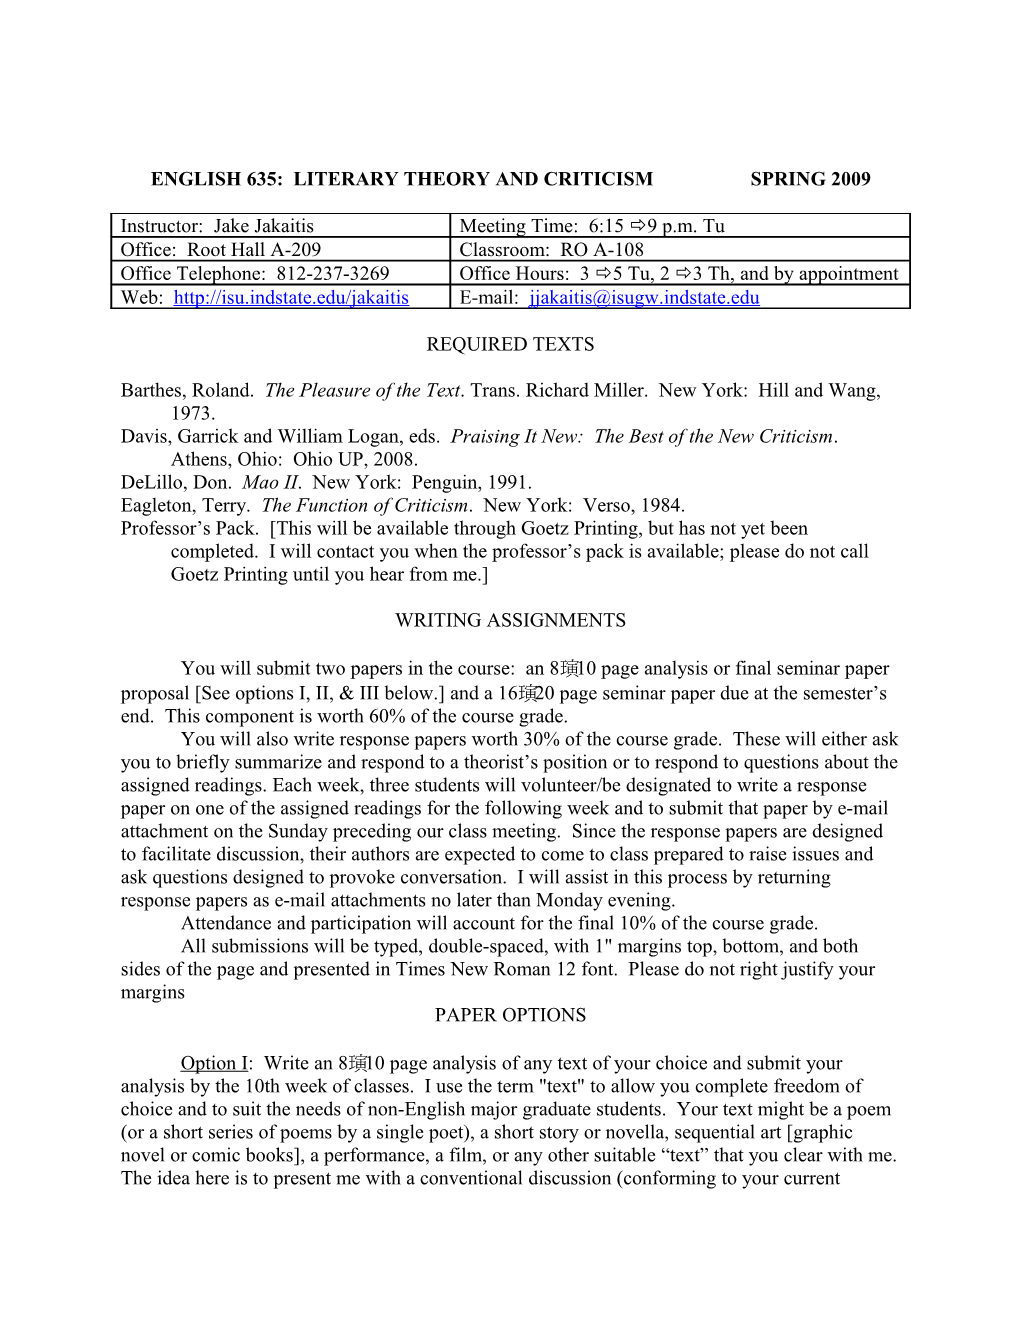 ENG 635: Literary Theory and Criticism Spring 2008